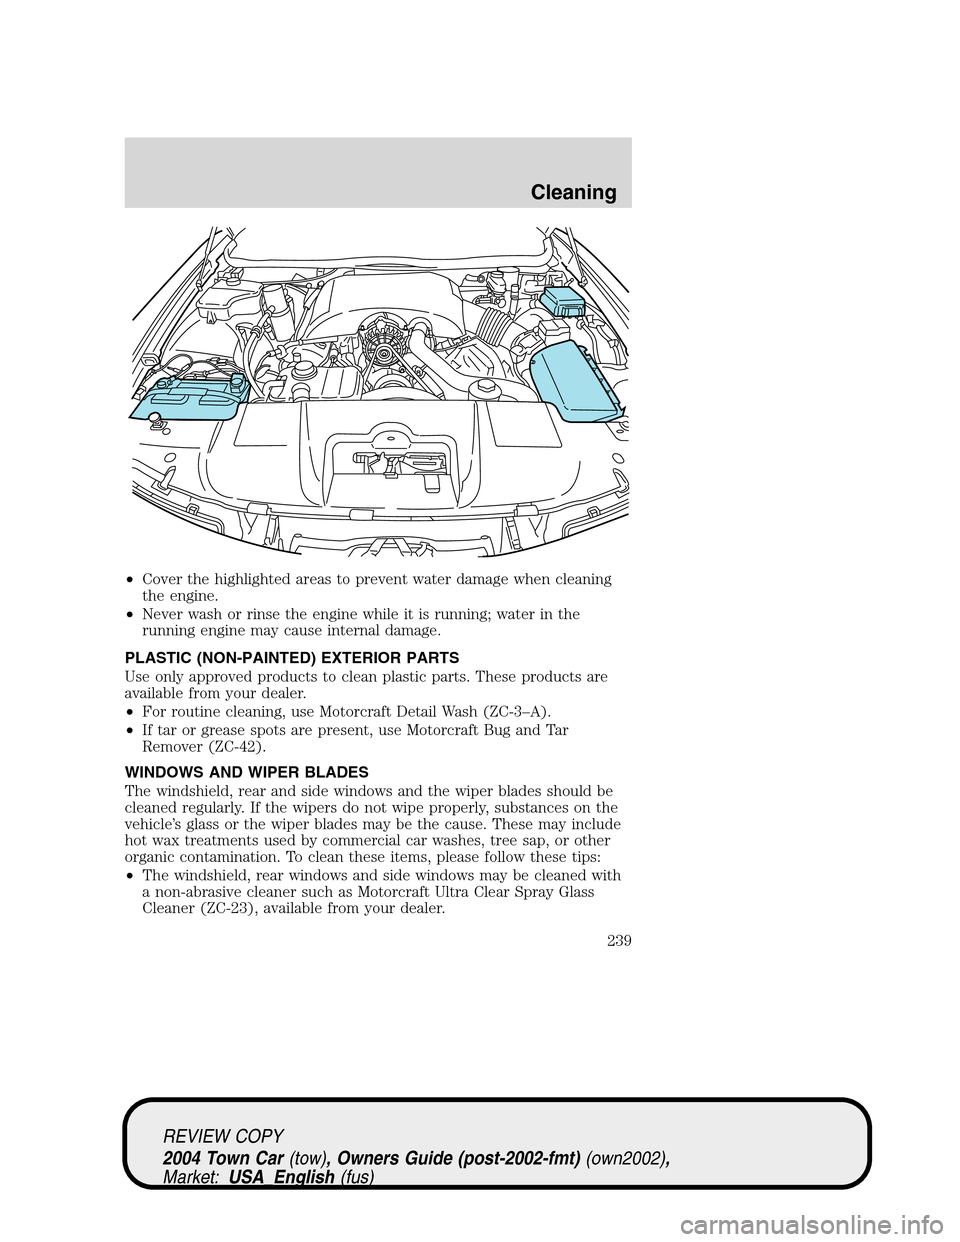 LINCOLN TOWN CAR 2004 Service Manual •Cover the highlighted areas to prevent water damage when cleaning
the engine.
•Never wash or rinse the engine while it is running; water in the
running engine may cause internal damage.
PLASTIC (